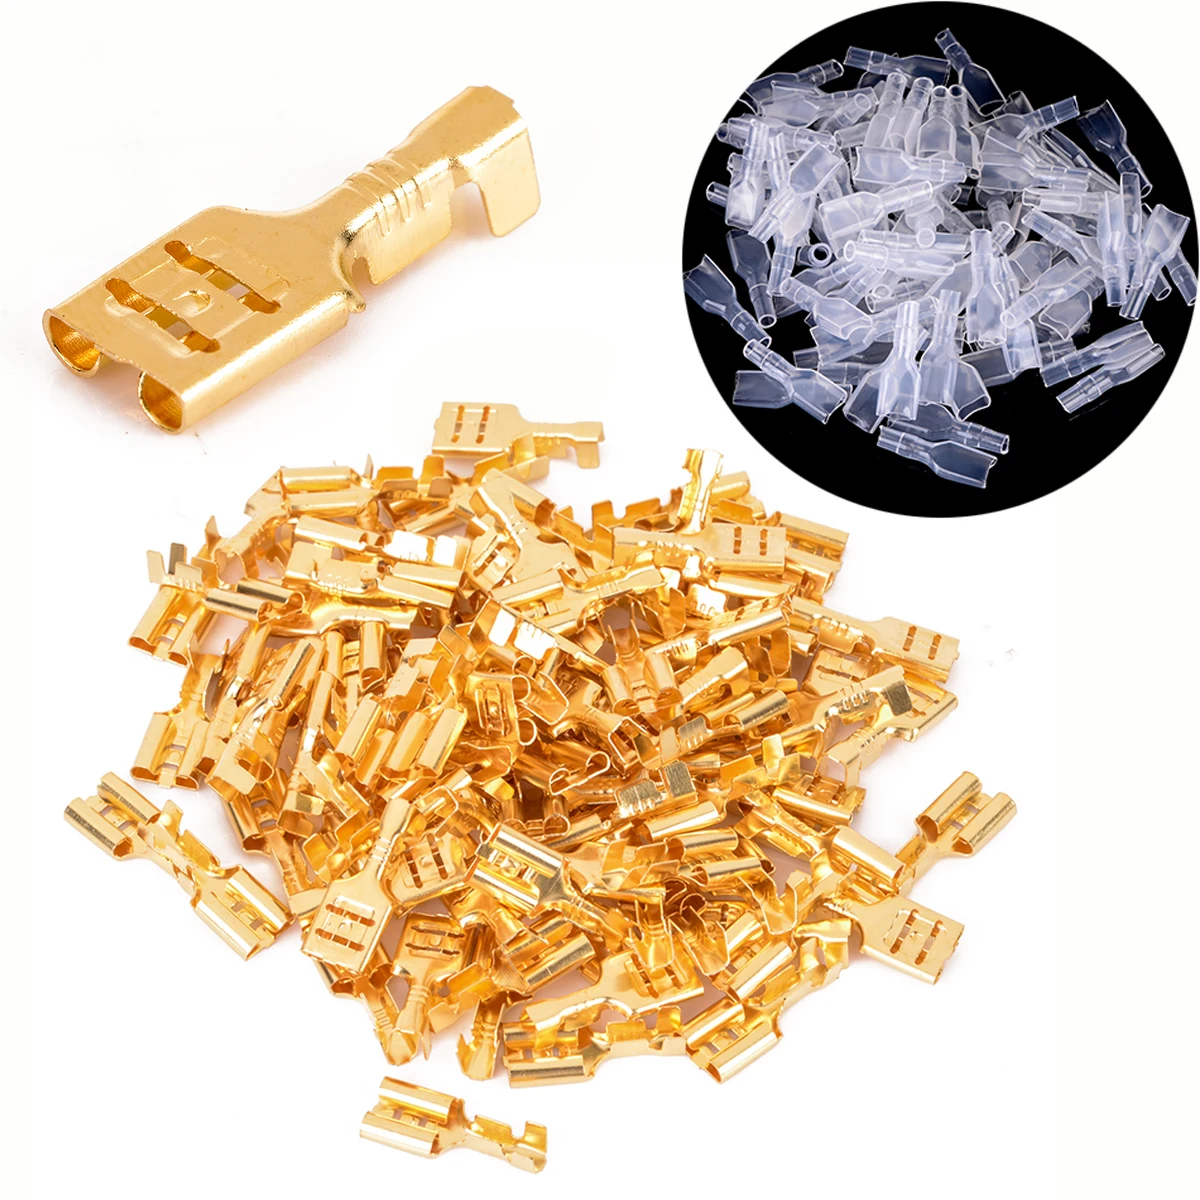 100pcs Brass Crimp Terminal 2.8/4.8/6.3mm Female Spade Connectors with 100pcs Insulating Sleeve 22-16 AWG